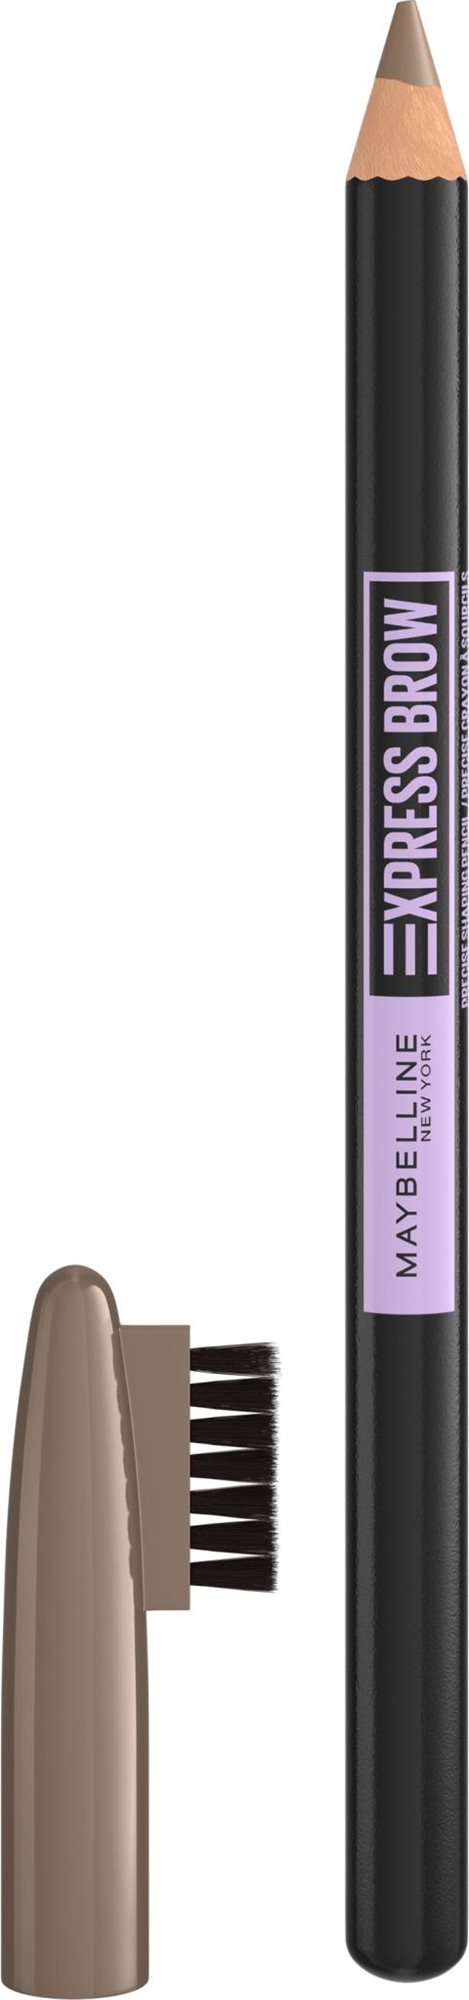 MAYBELLINE NEW YORK Express Brow Shaping Pencil 03 Soft Brown